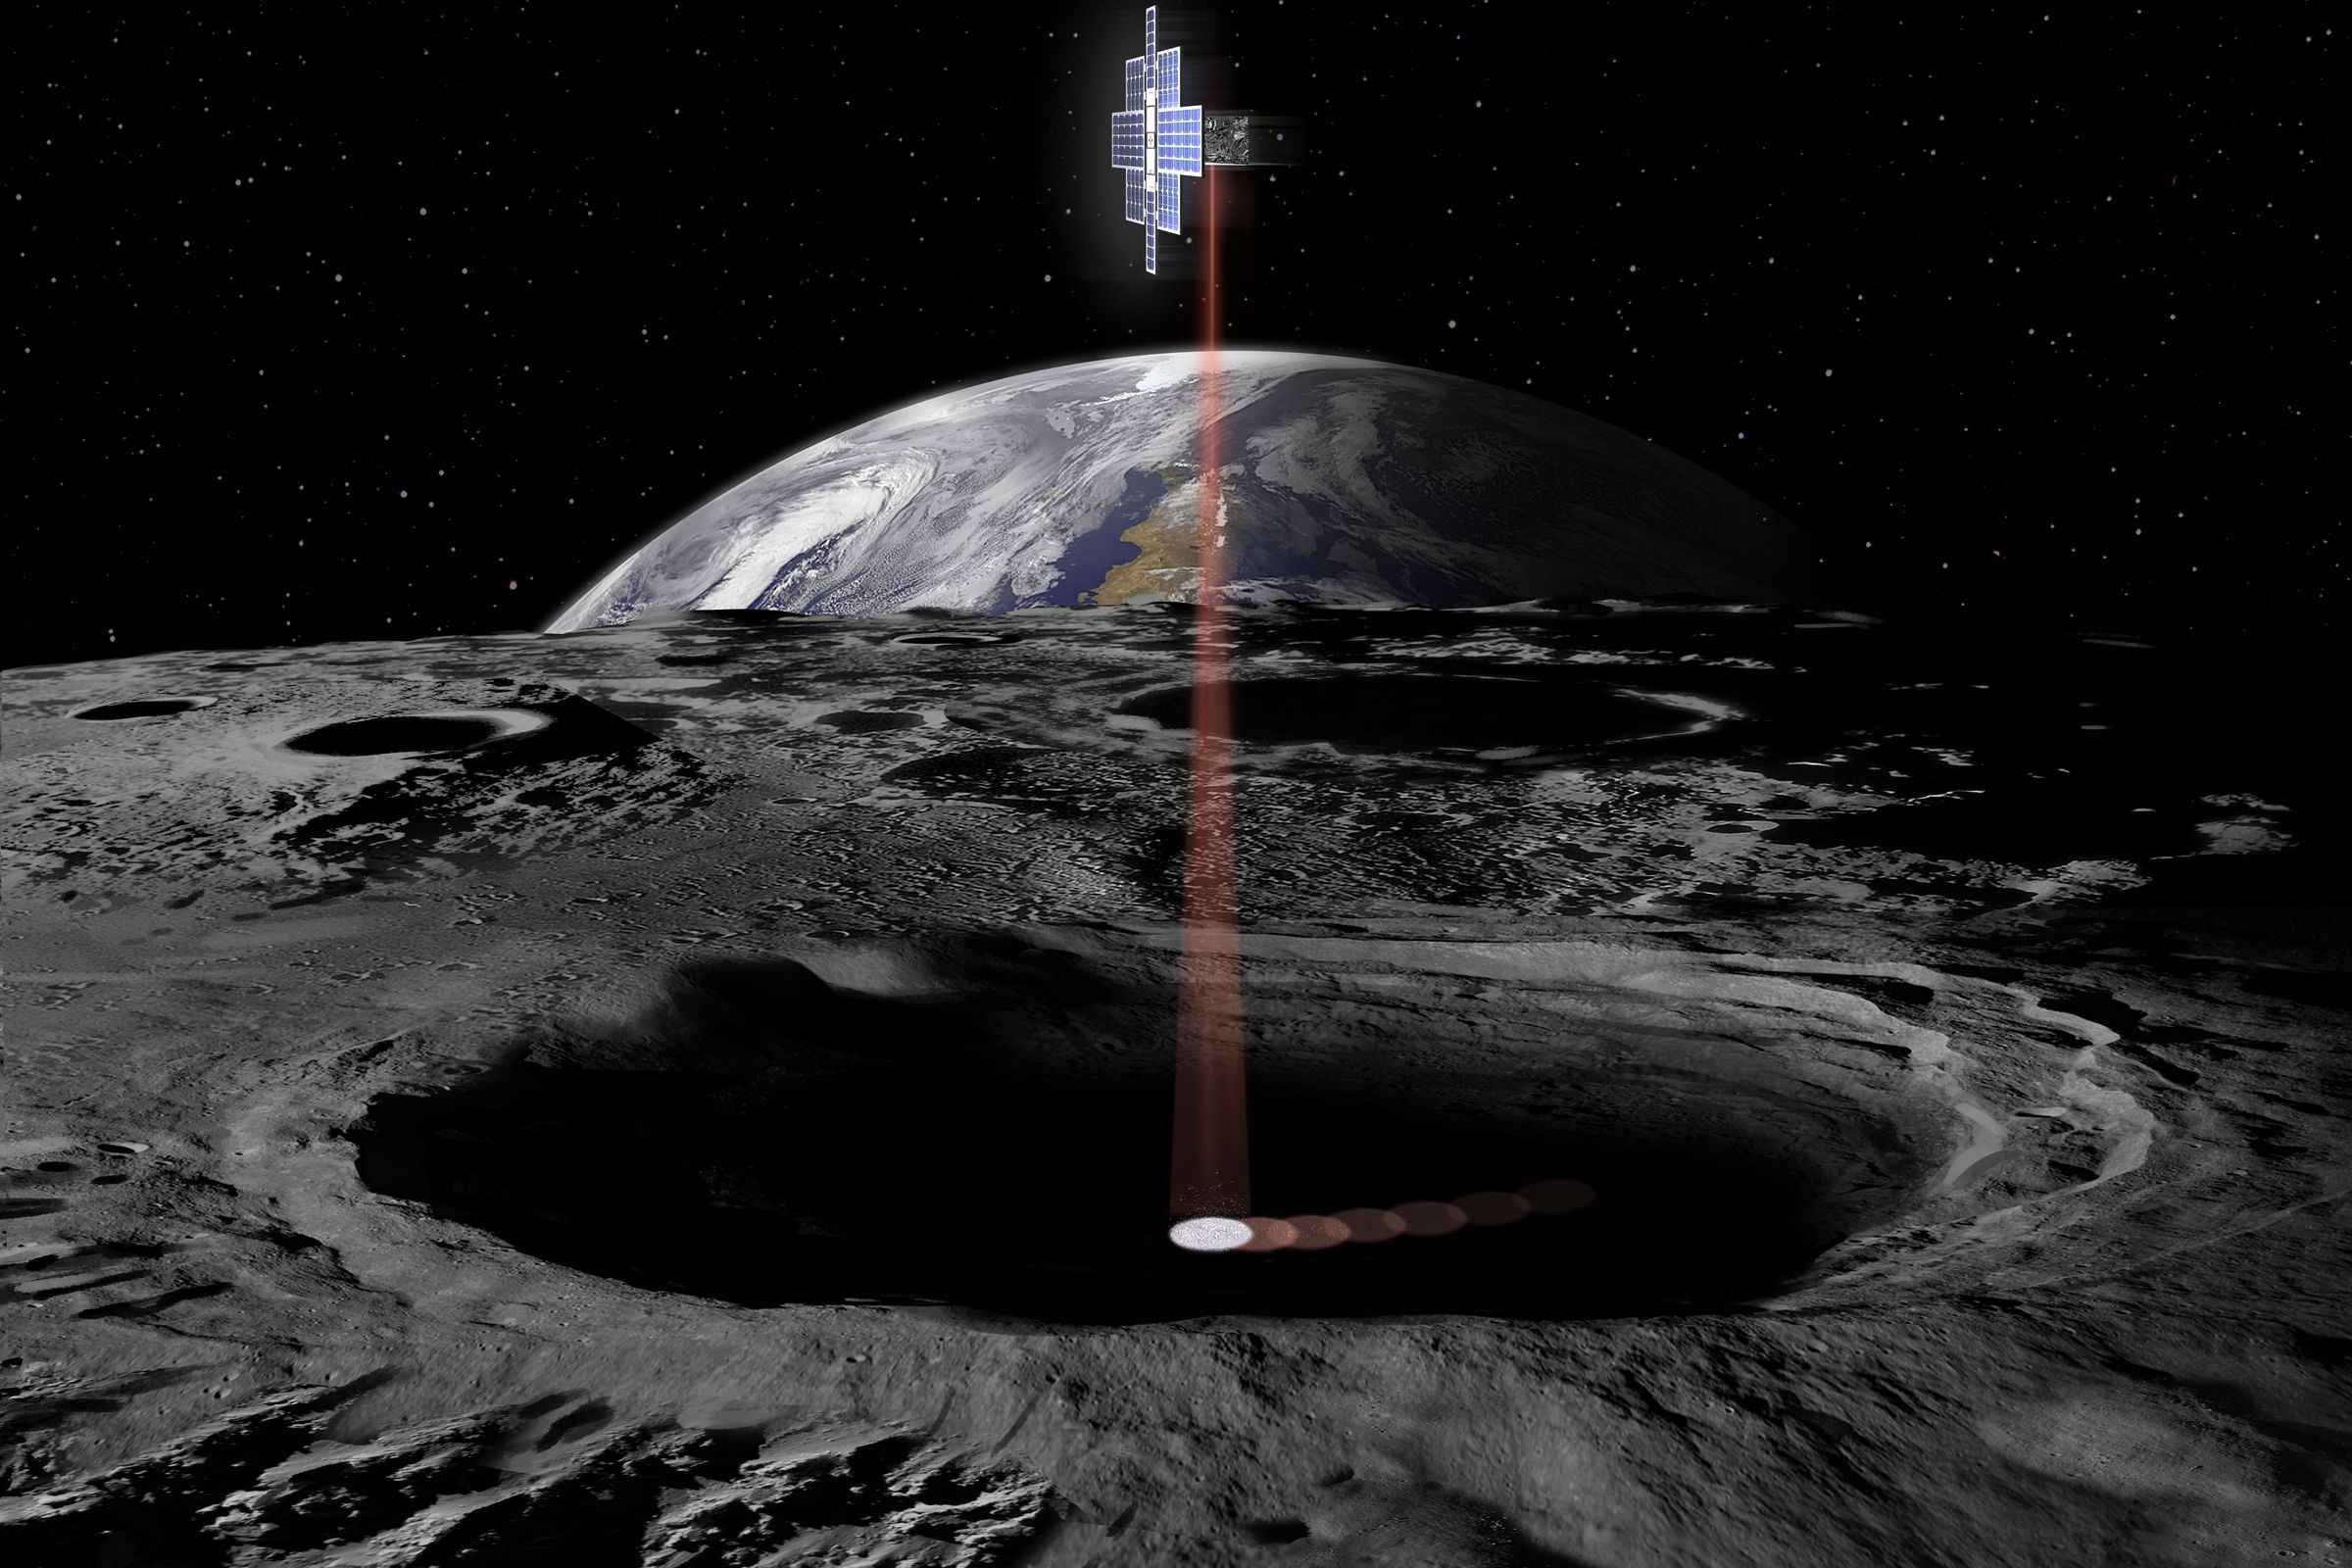 A small solar-paneled spacecraft flies above the moon’s cratered surface. a beam of light emits from the spacecraft, illuminating the crater below. in the background, the curve of the Earth rises above the Moon.